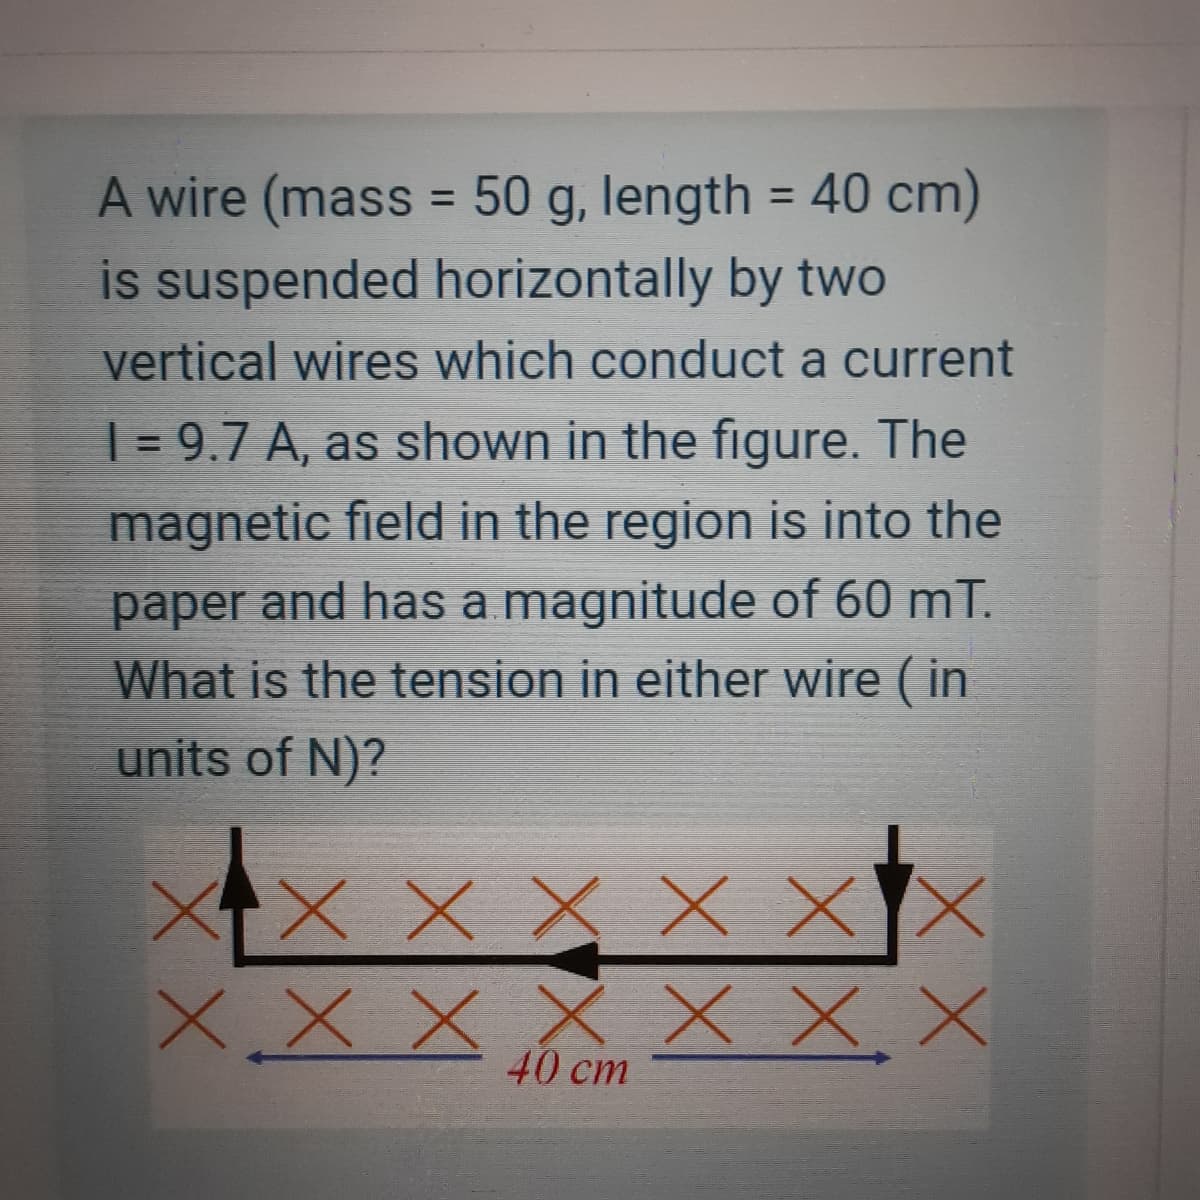 A wire (mass = 50 g, length = 40 cm)
is suspended horizontally by two
%3D
%3D
vertical wires which conduct a current
| = 9.7 A, as shown in the figure. The
magnetic field in the region is into the
paper and has a magnitude of 60 mT.
What is the tension in either wire ( in
units of N)?
XX x X X X
XX X X x X.X
40 cm
